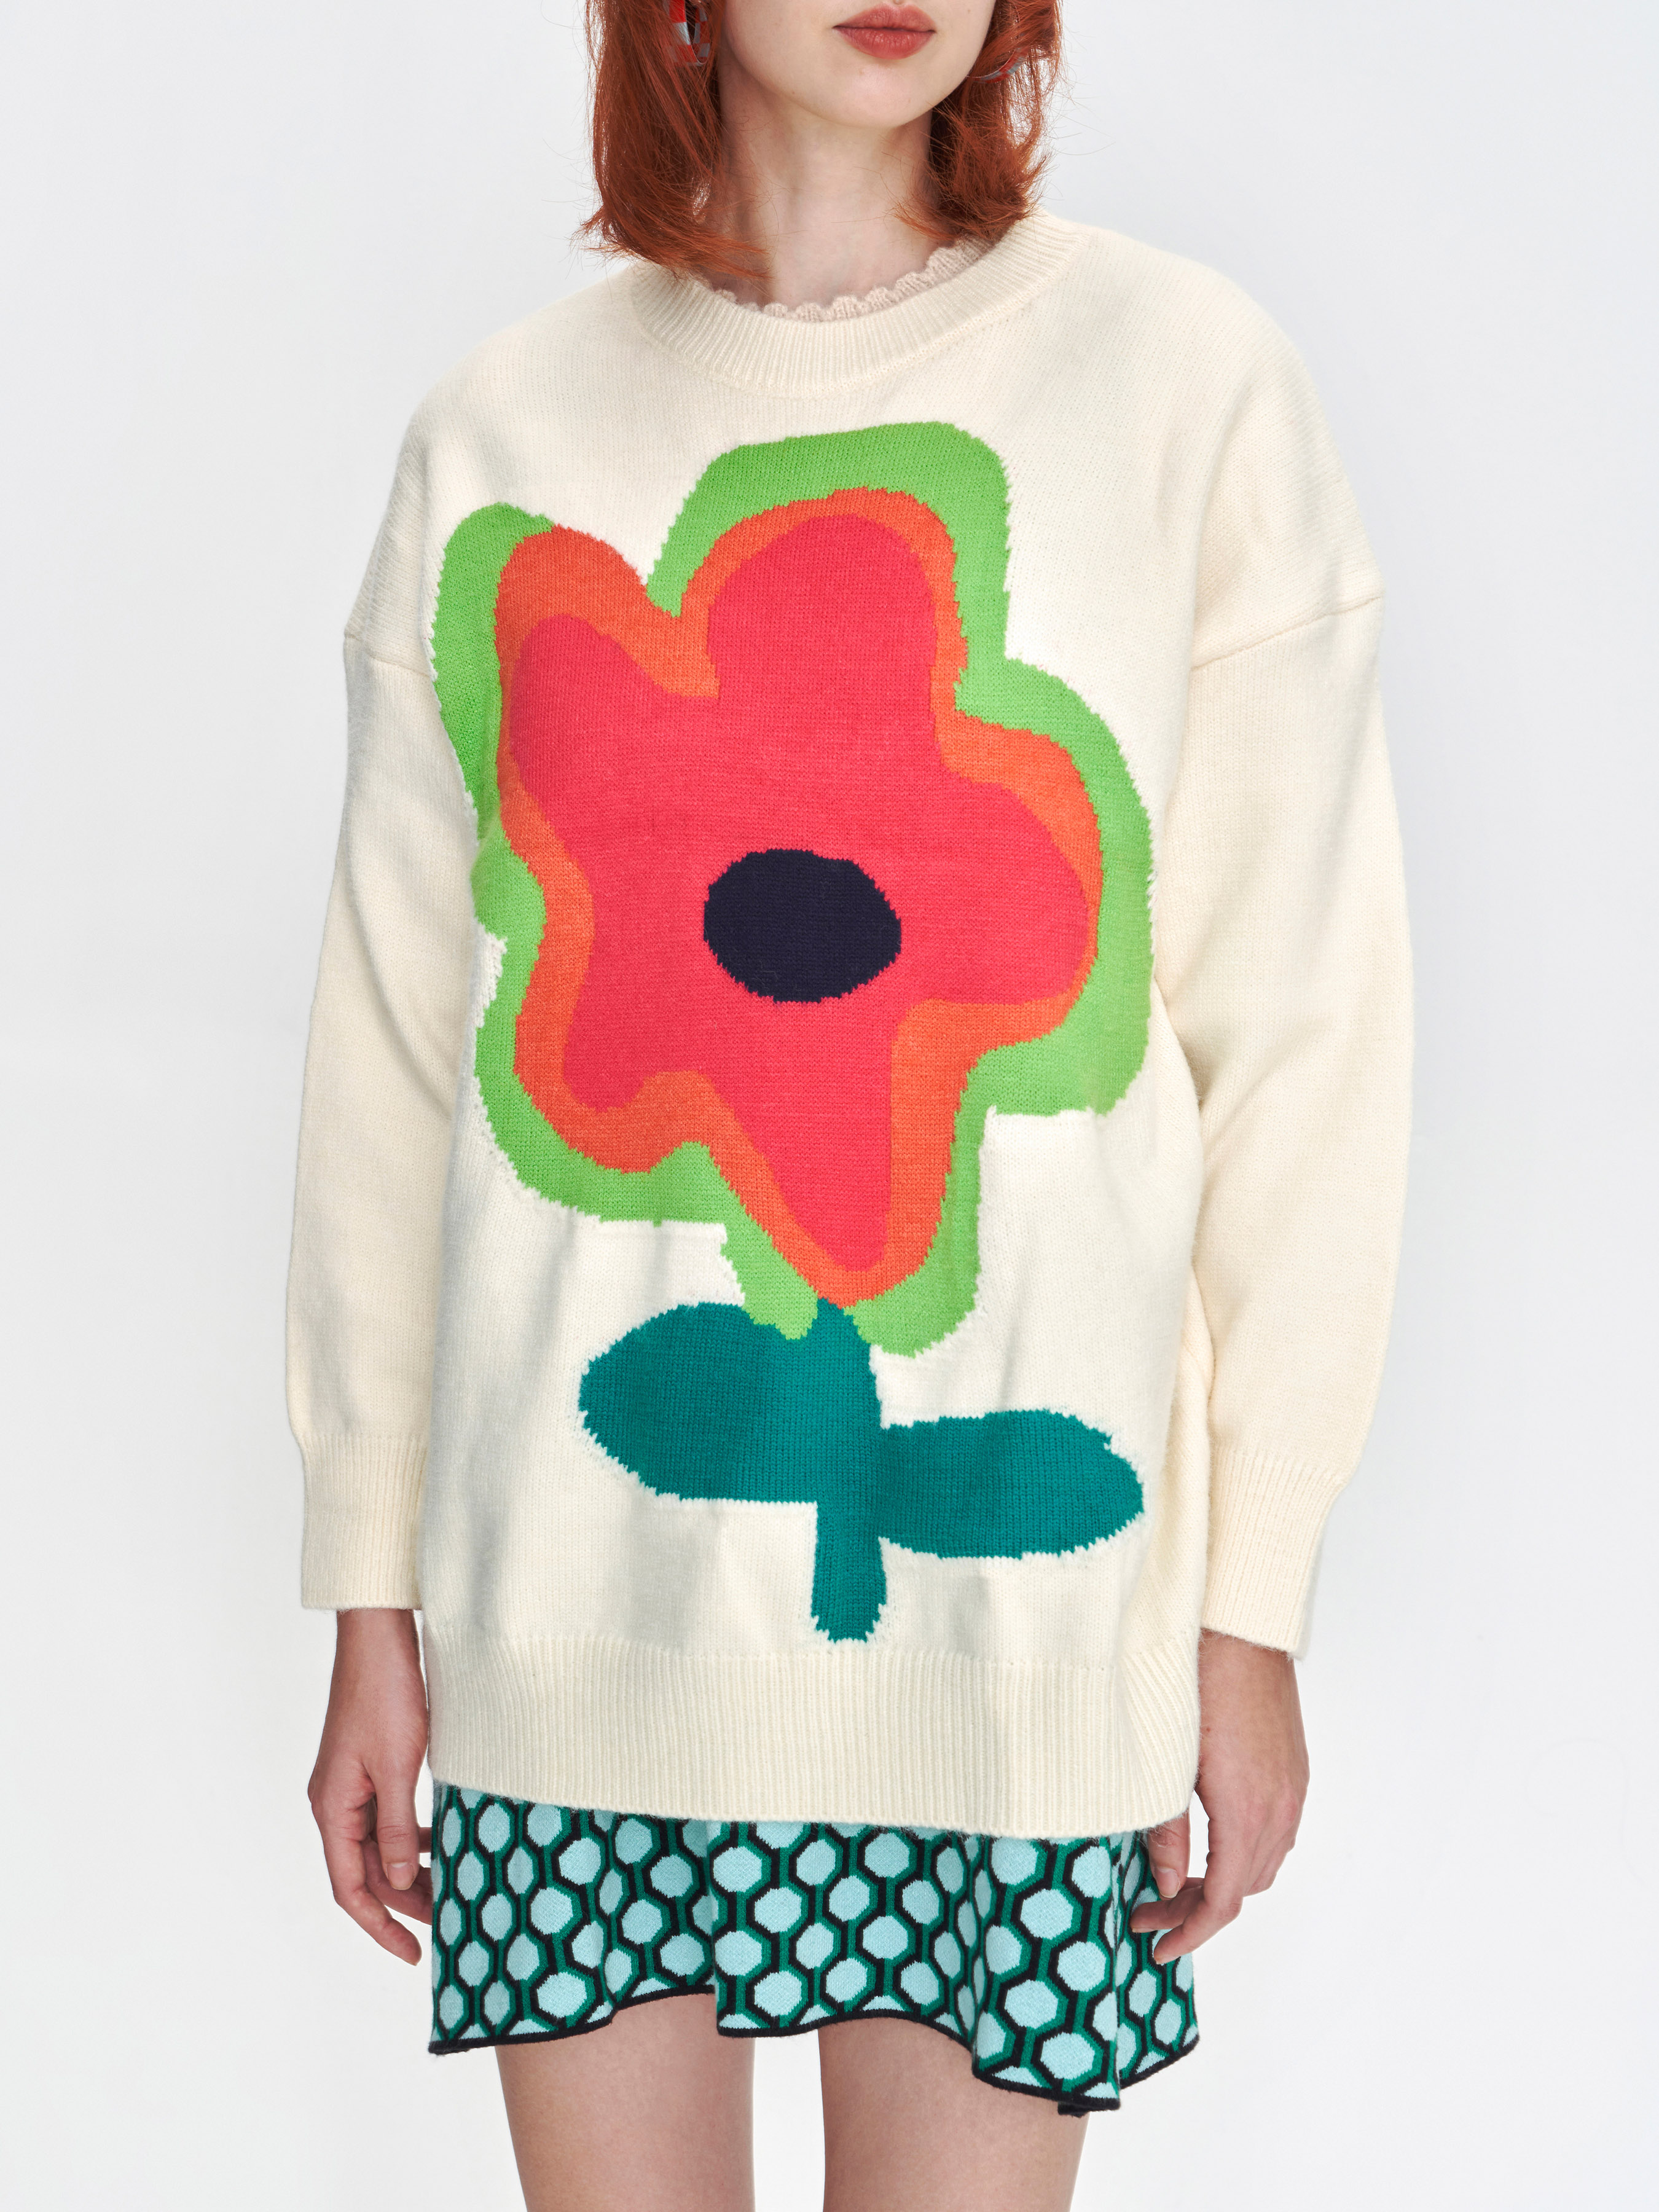 Flower Painting Sweater - Cider